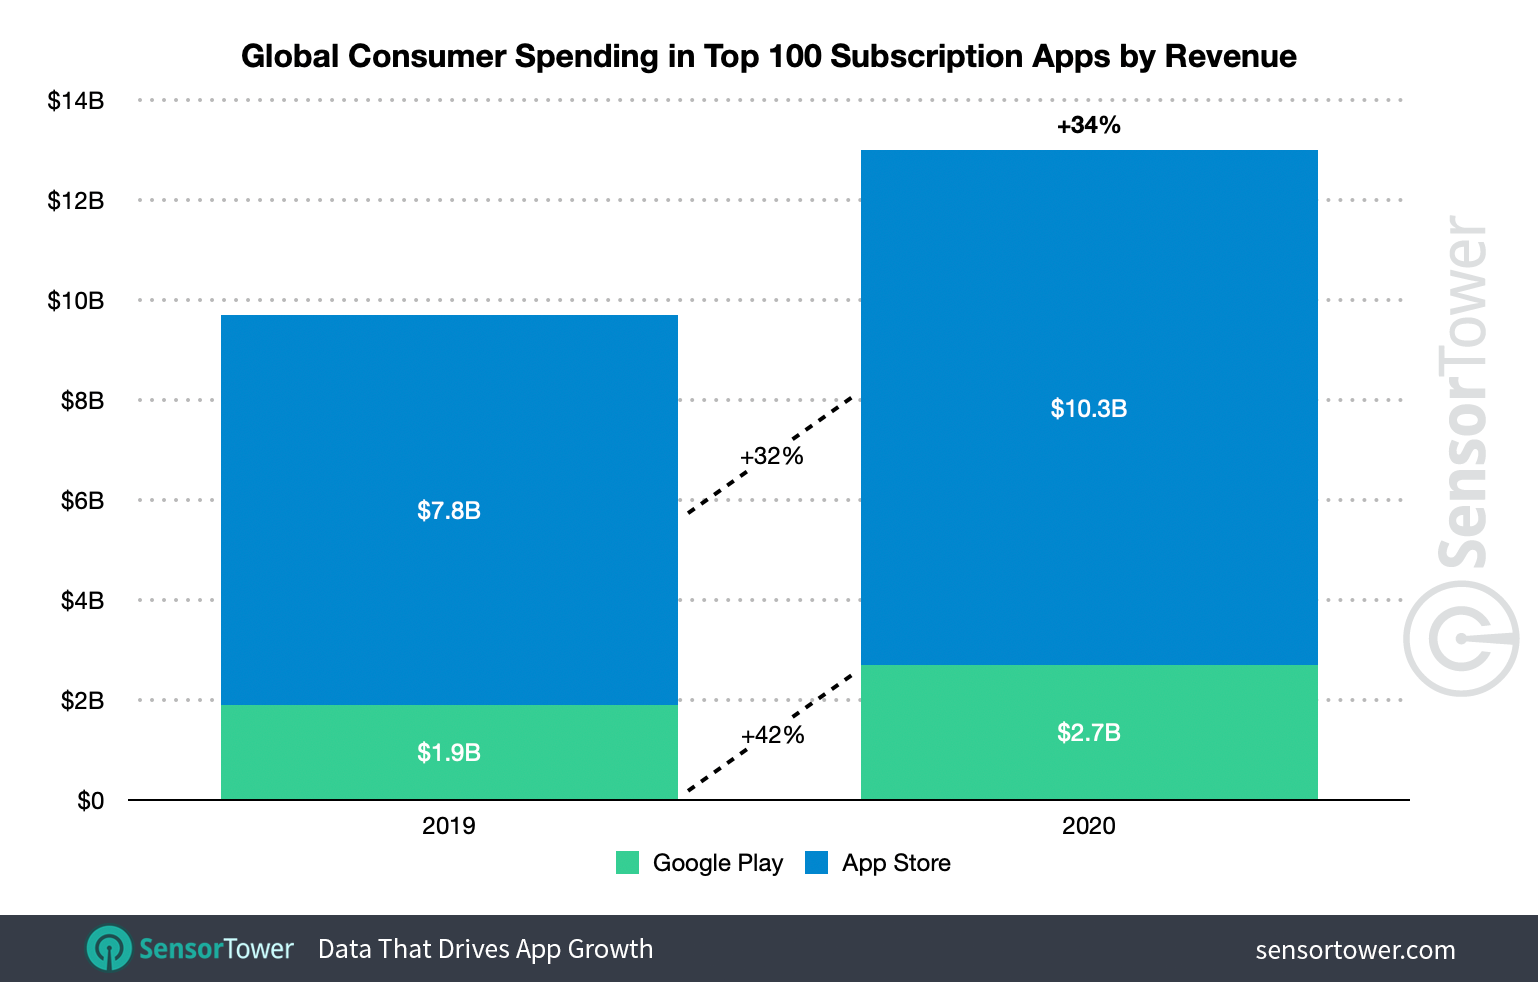 Global subscription app spending climbed 34 percent to $13 billion in 2020